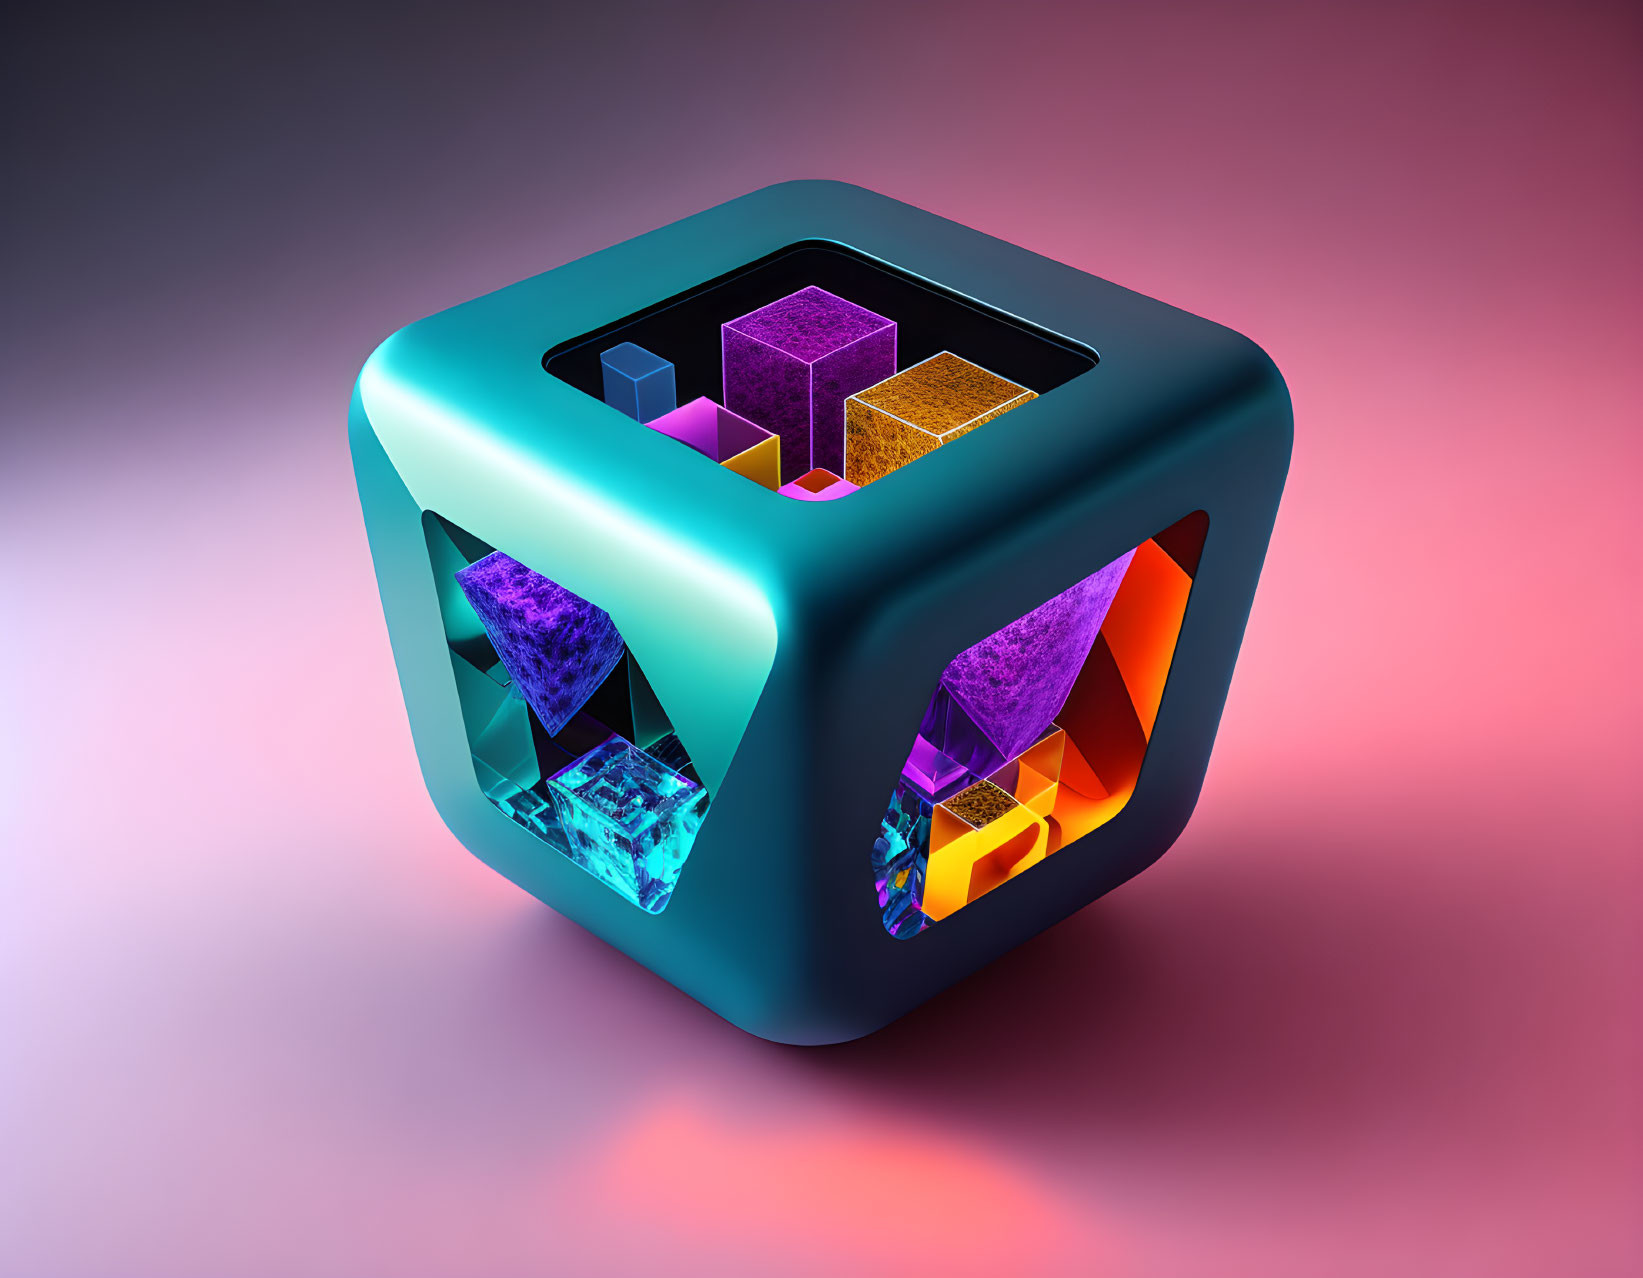 Reflective cube with intricate cutouts and glowing geometric shapes in neon-lit environment